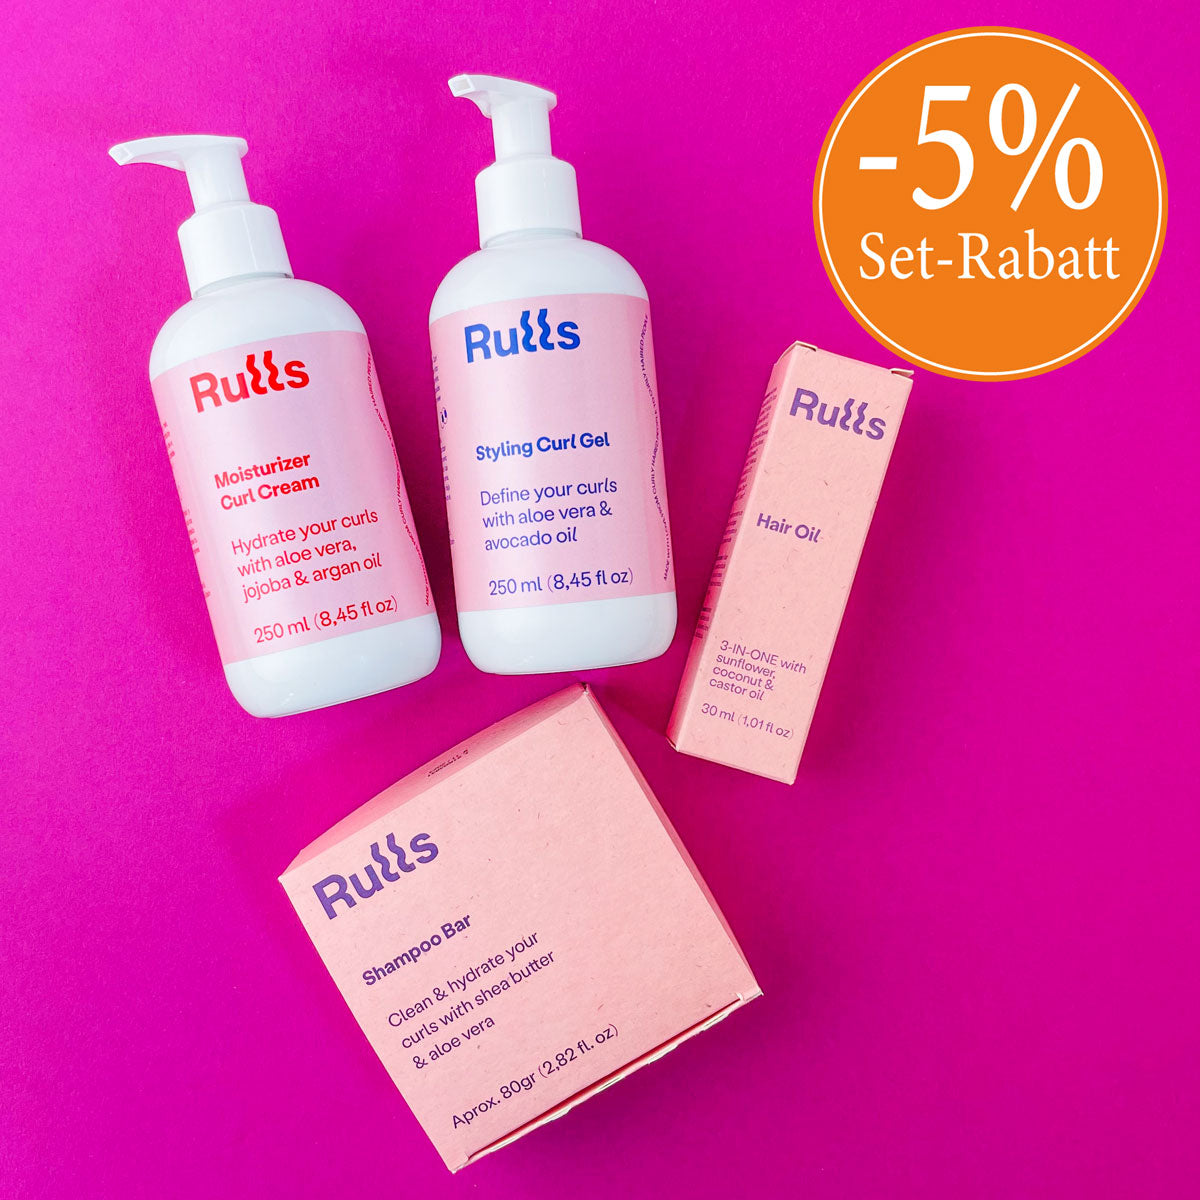 Rulls | Curly Hair Care Routine Set